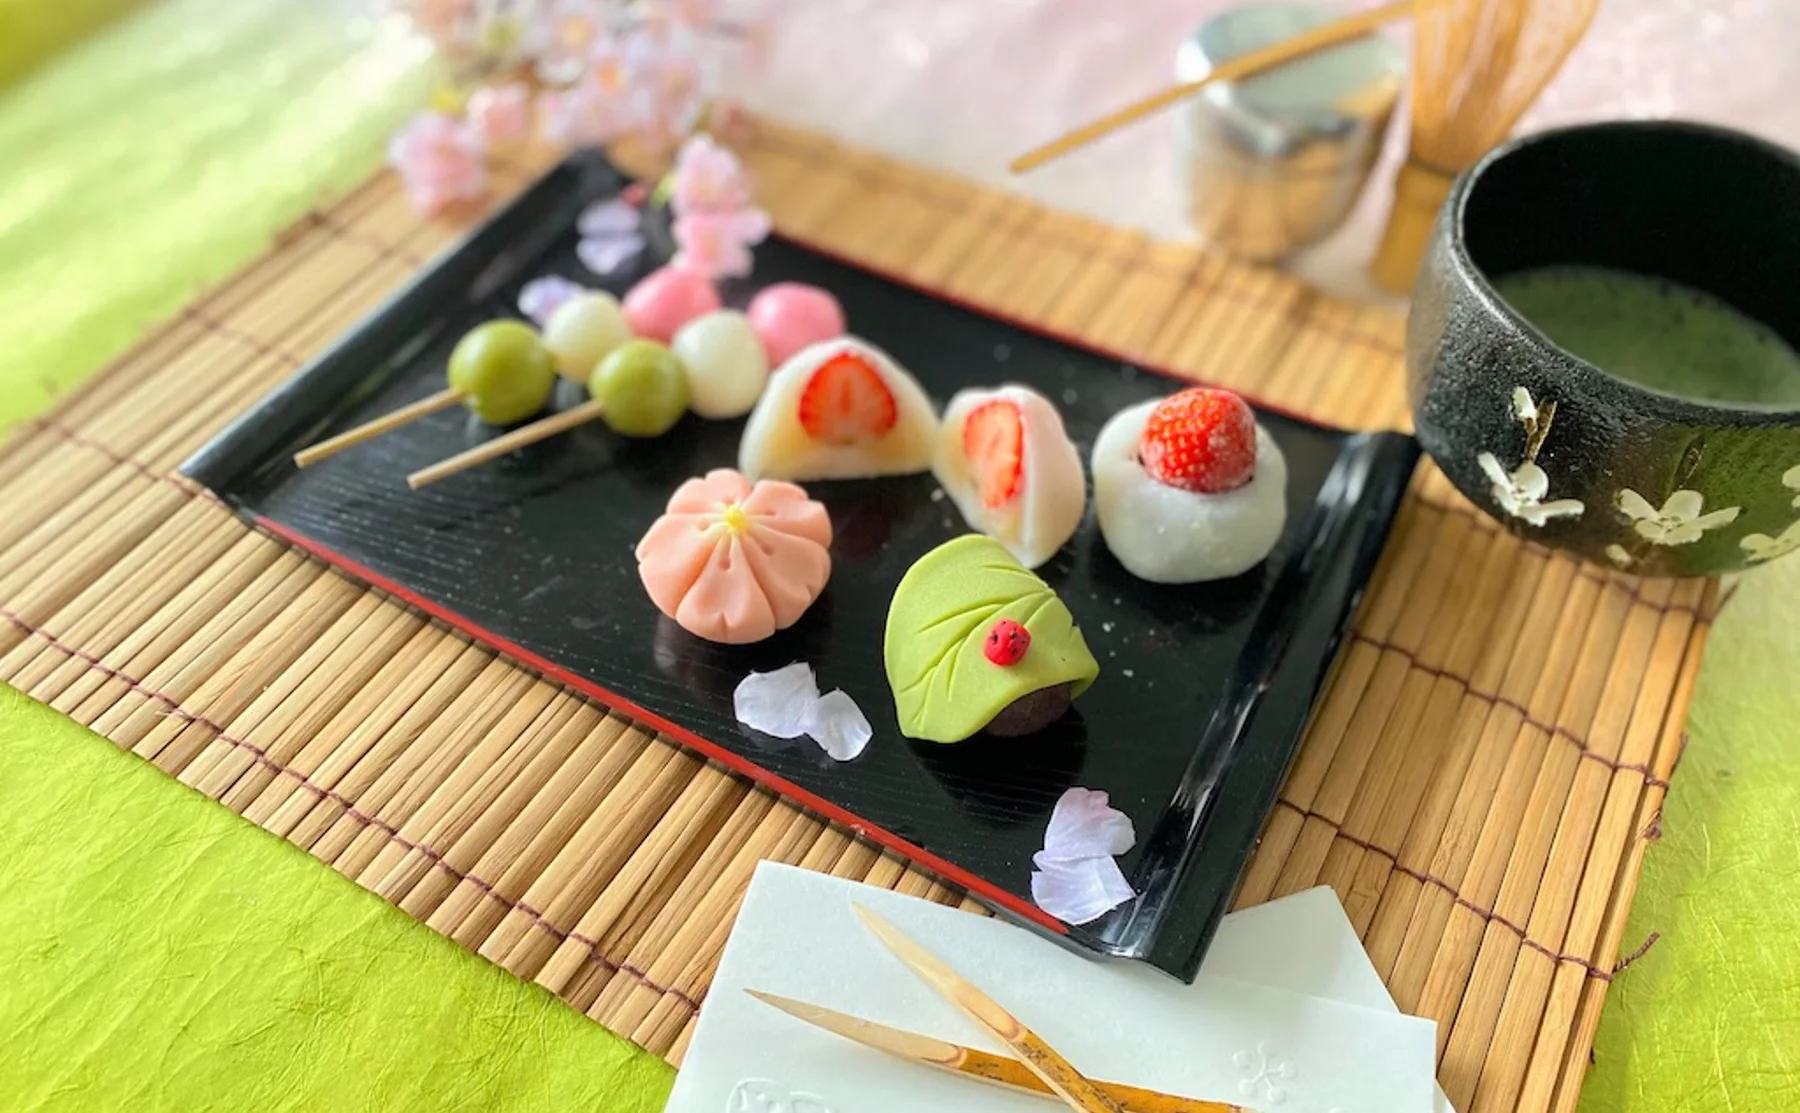 Learn how to make Mochi and Japanese Traditional Sweets - 1507606